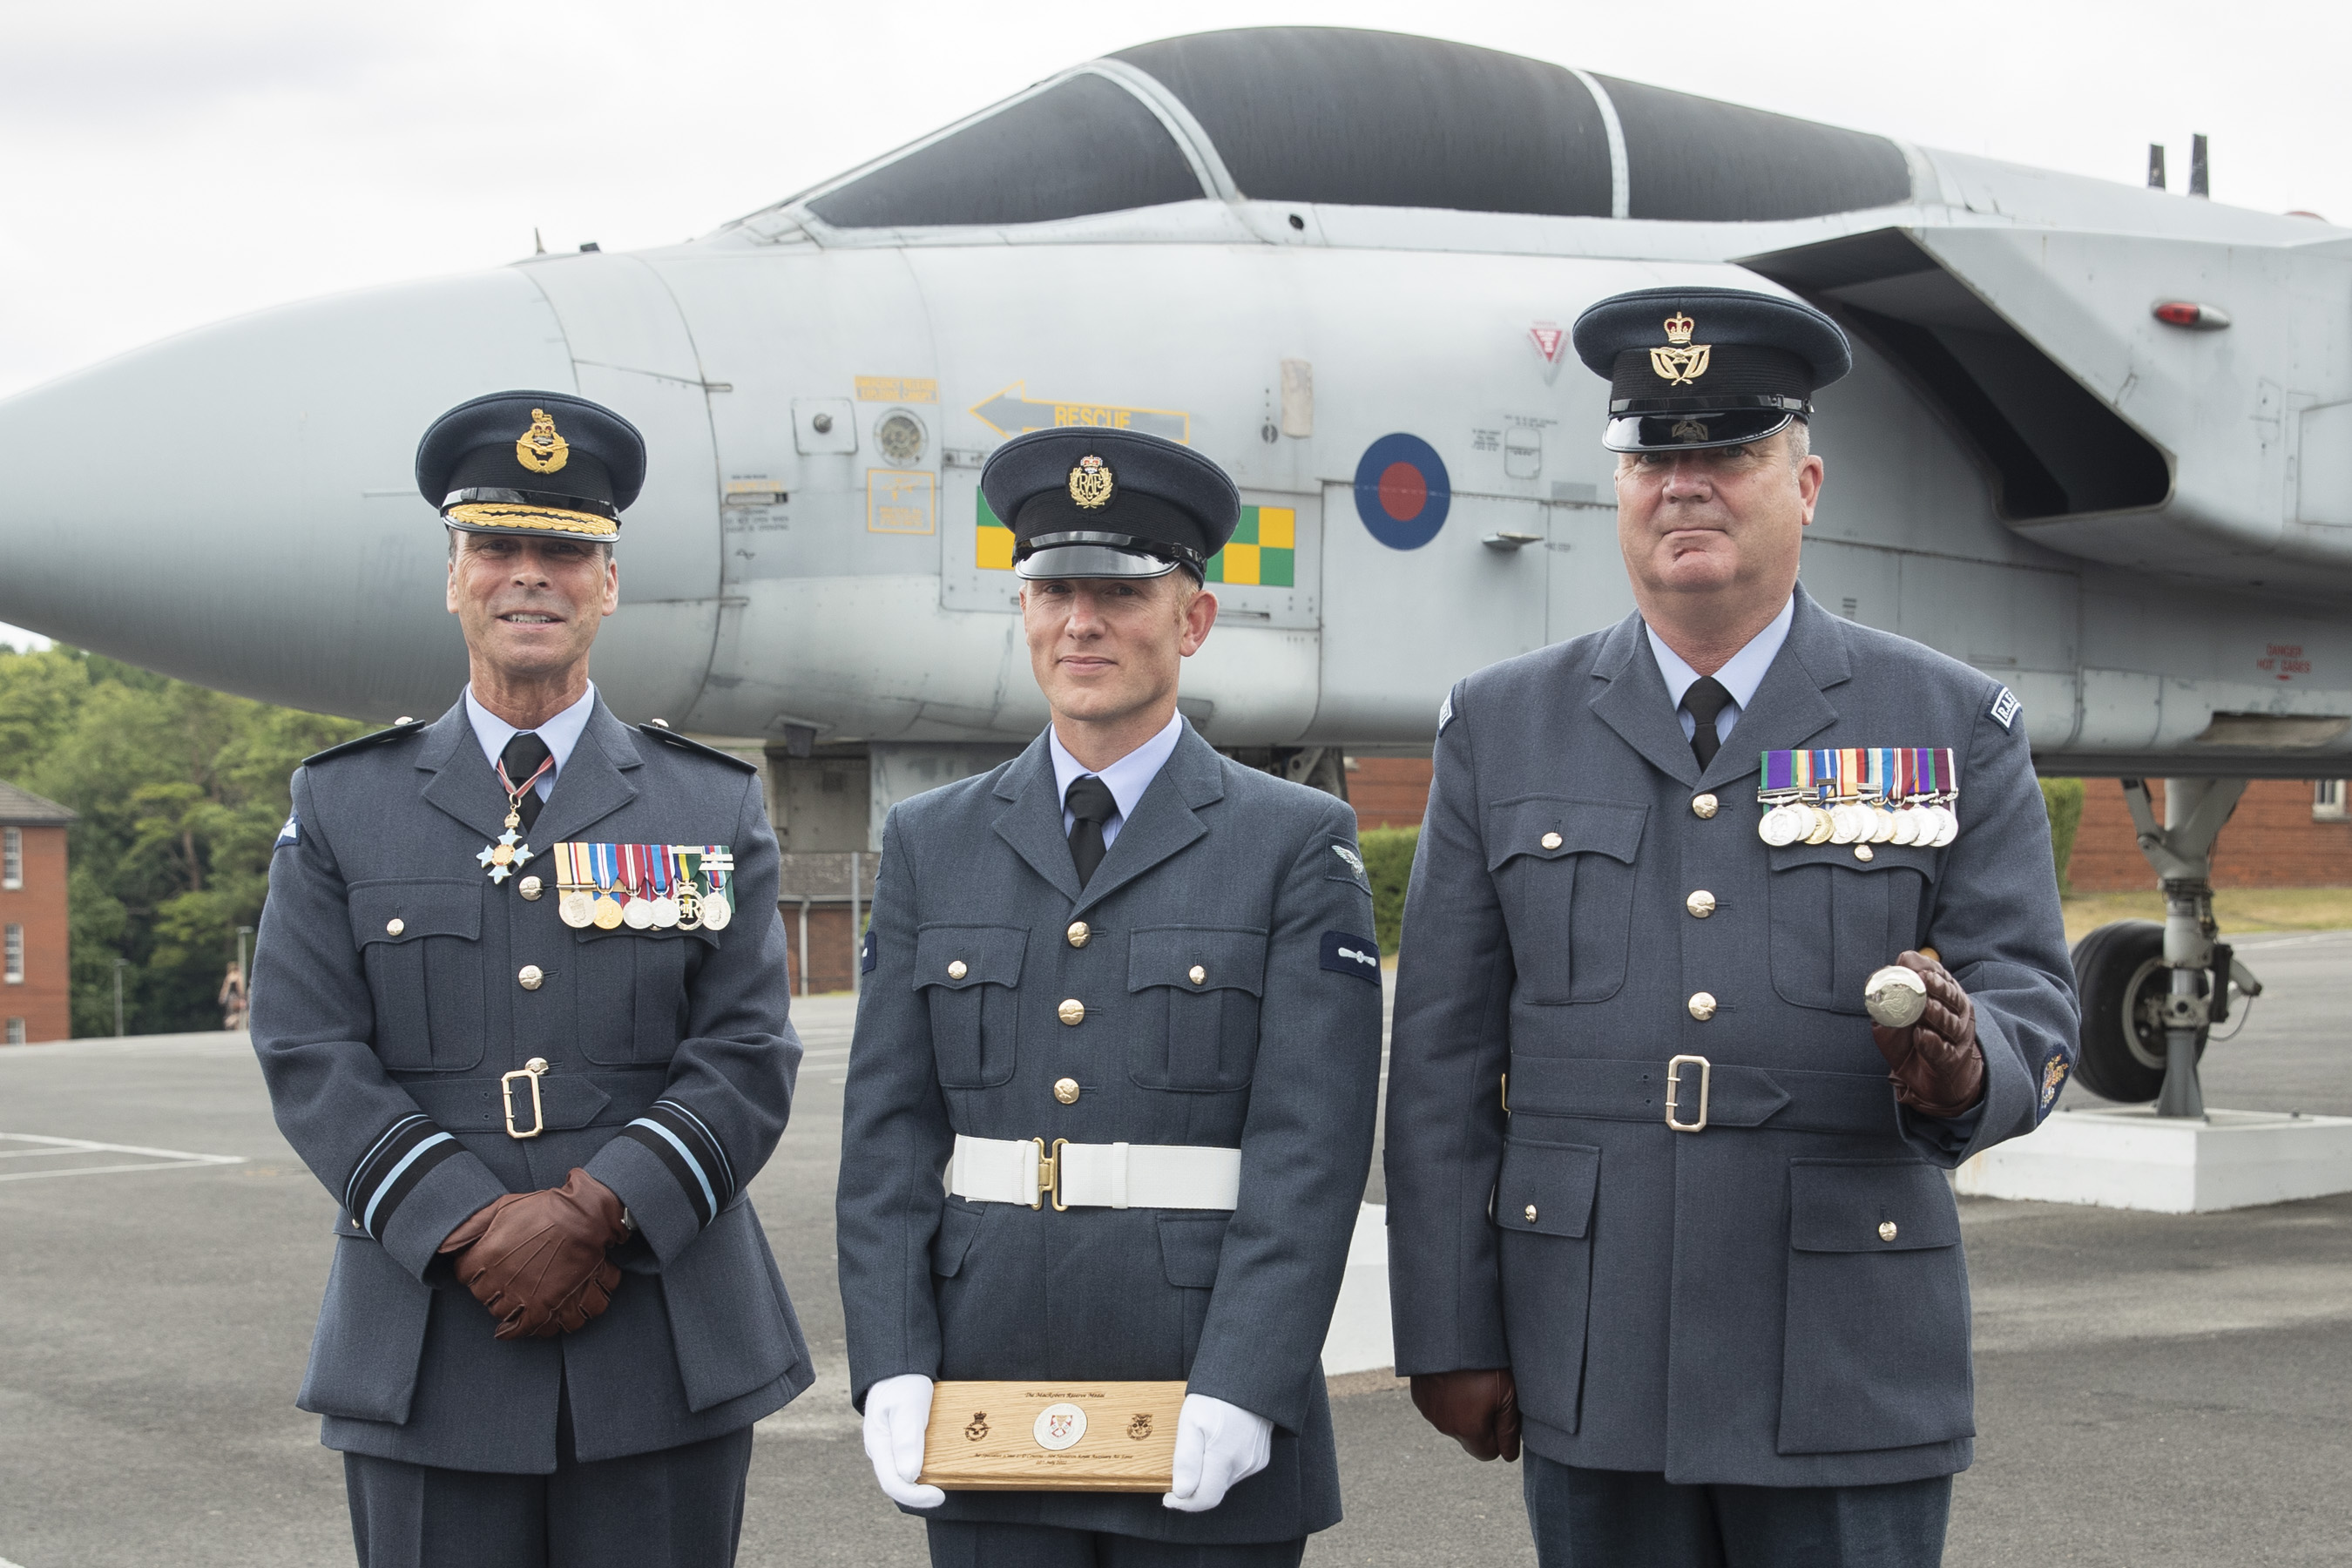 From left to right: Air Vice-Marshal Ranald Munro (Commandant General RAF Reserve), Air Specialist Class 2 David Cousins, and Warrant Officer Chris Peacock (Reserves Command Warrant Officer)